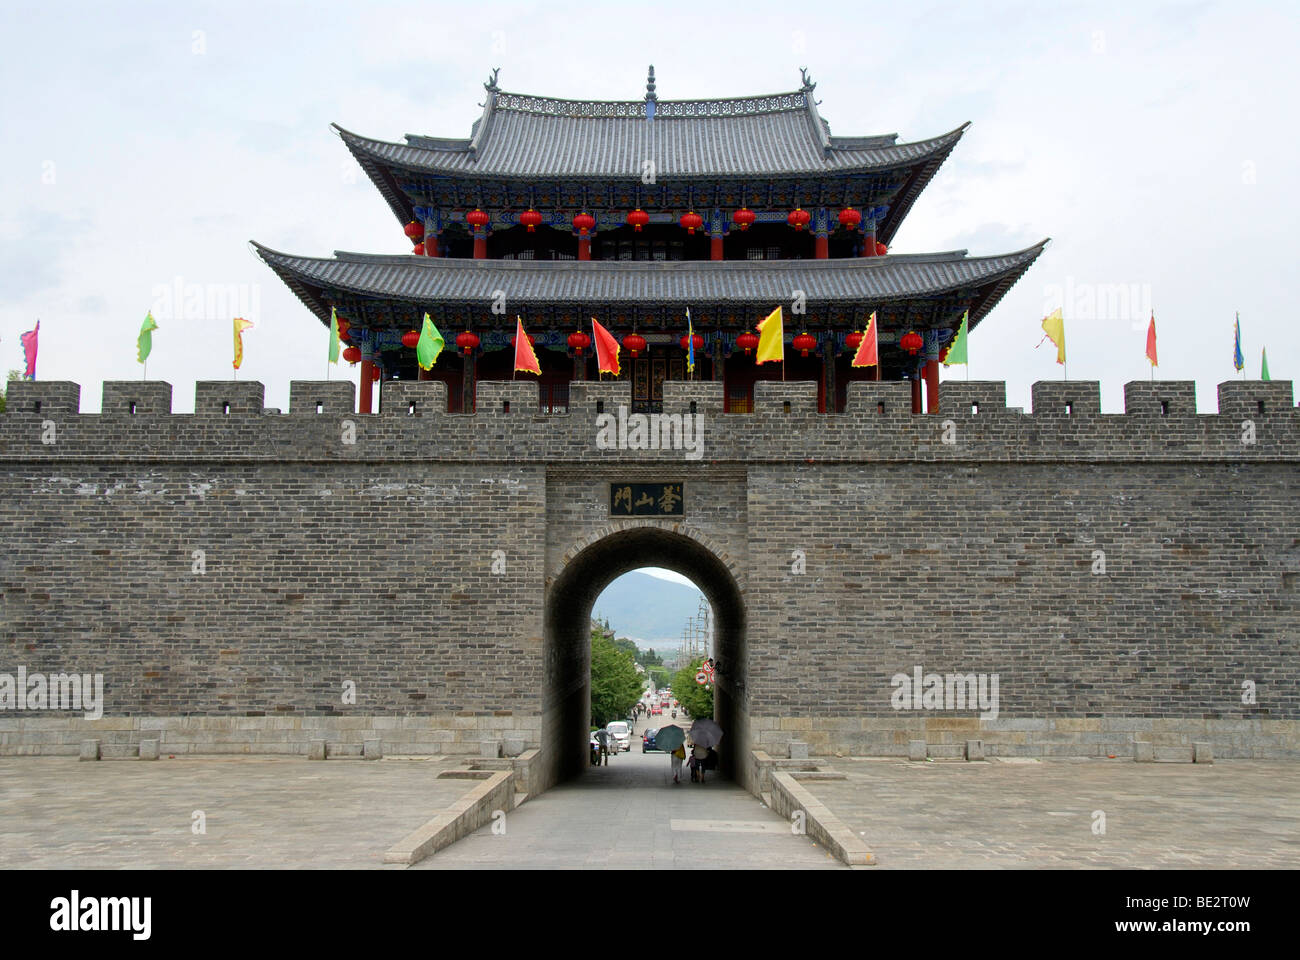 Gate of the city wall, West Gate, Dali, Yunnan Province, People's Republic of China, Asia Stock Photo